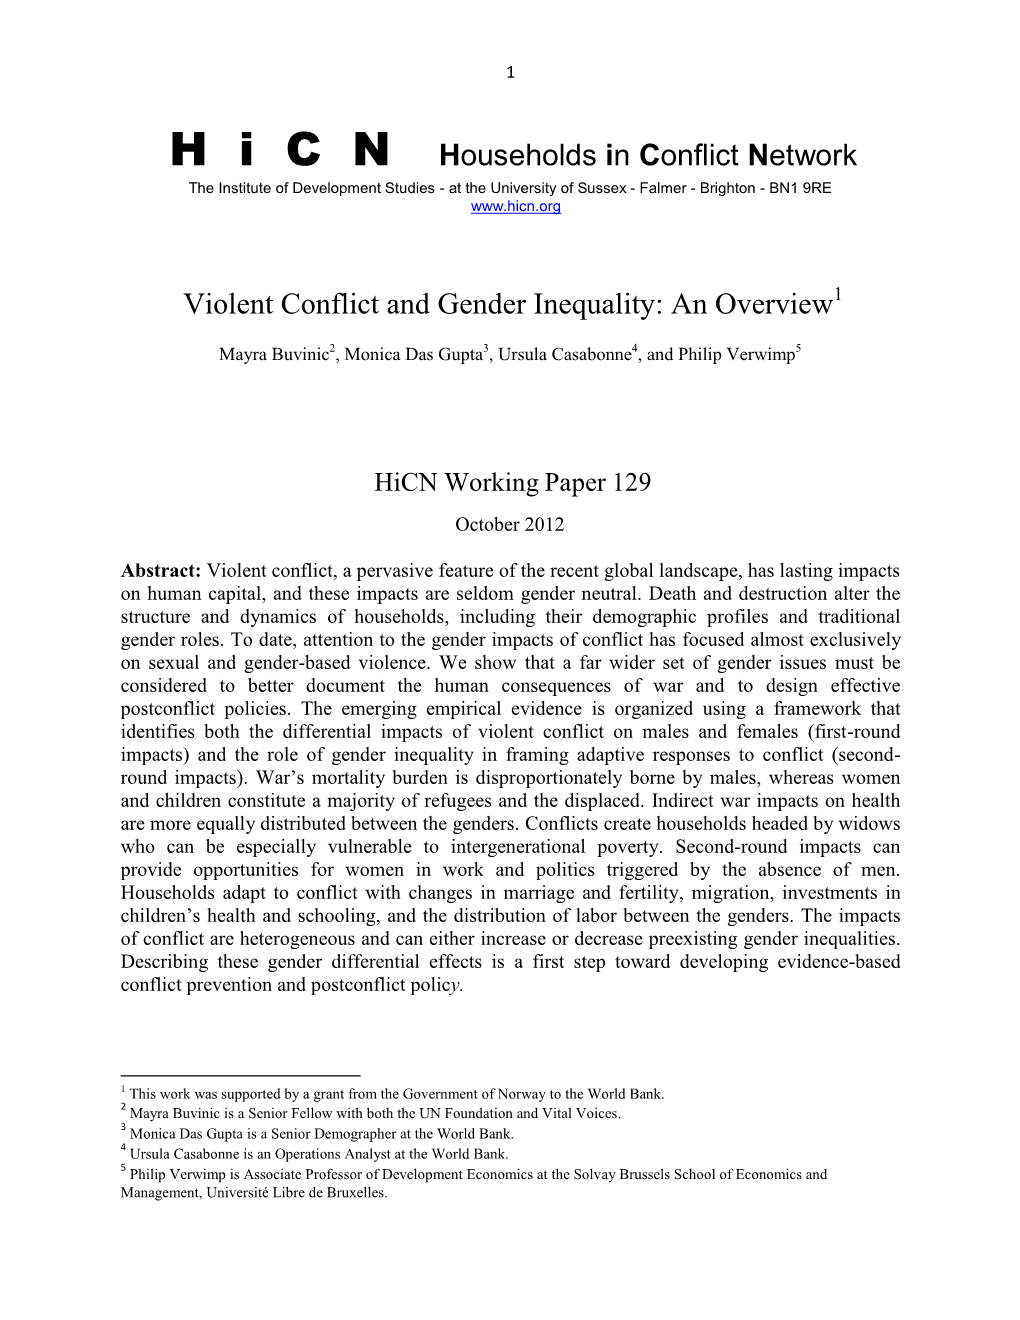 Violent Conflict and Gender Inequality: an Overview1